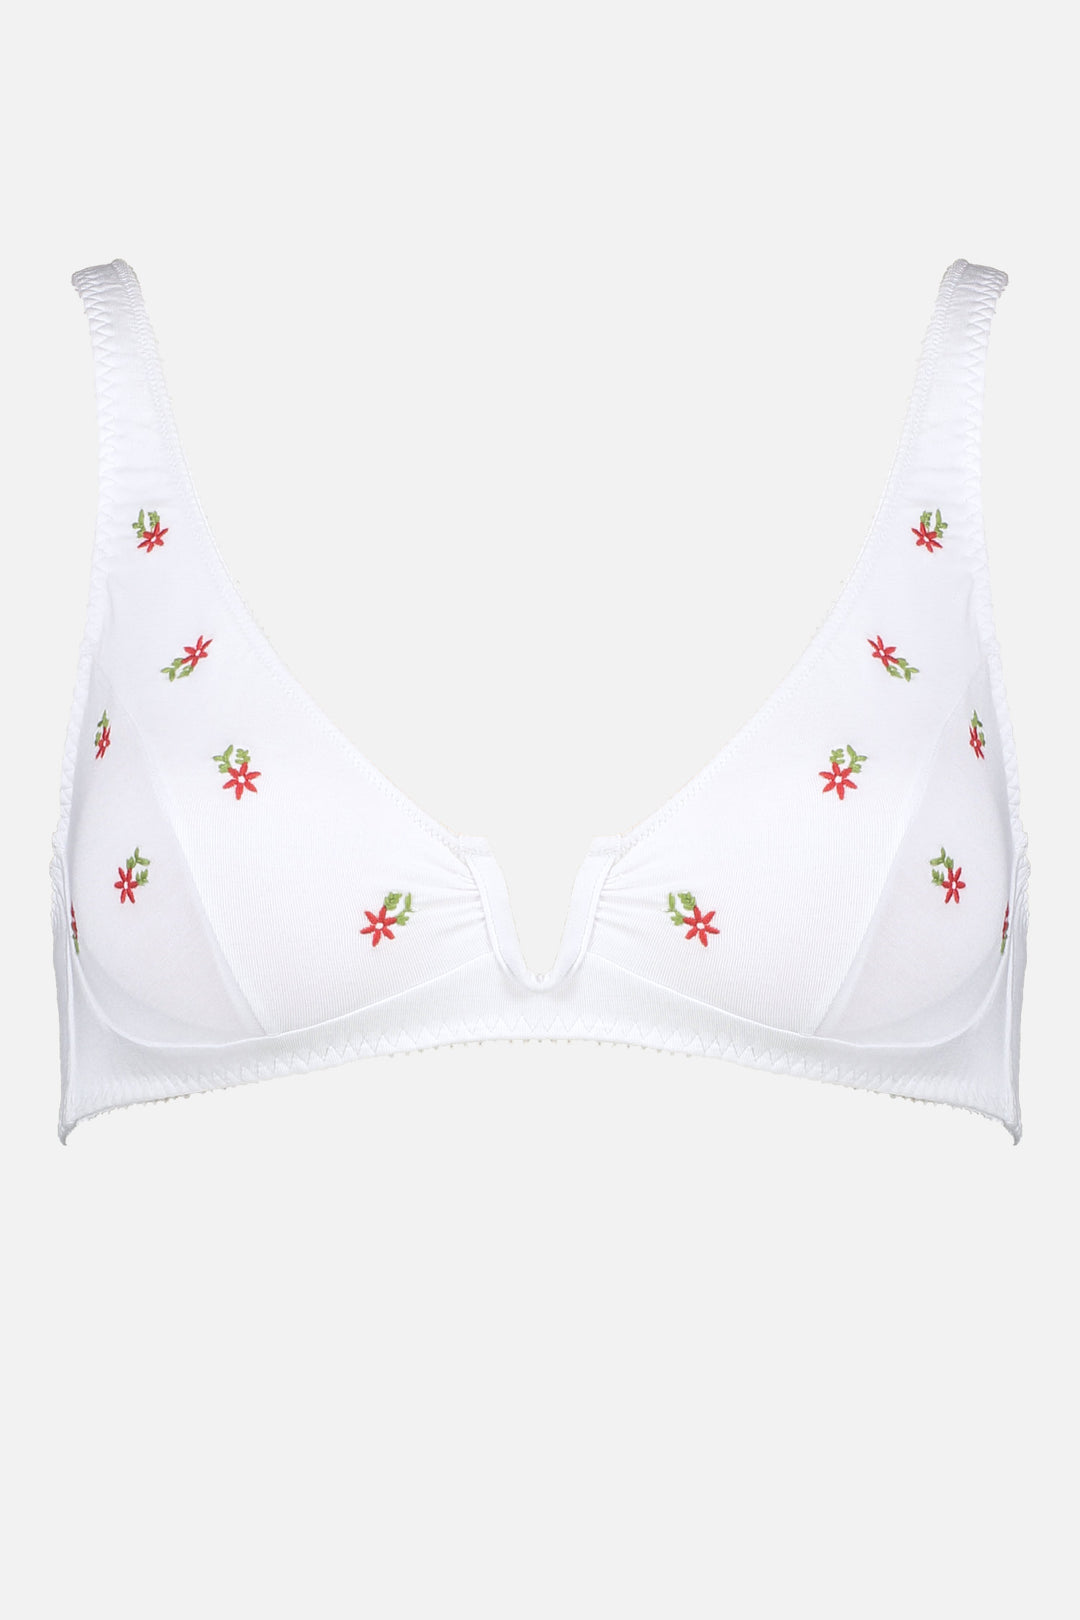 Videris Lingerie Sarah underwire free soft cup bra in white embroidered TENCEL™ with a scooped plunge cup and front U wire